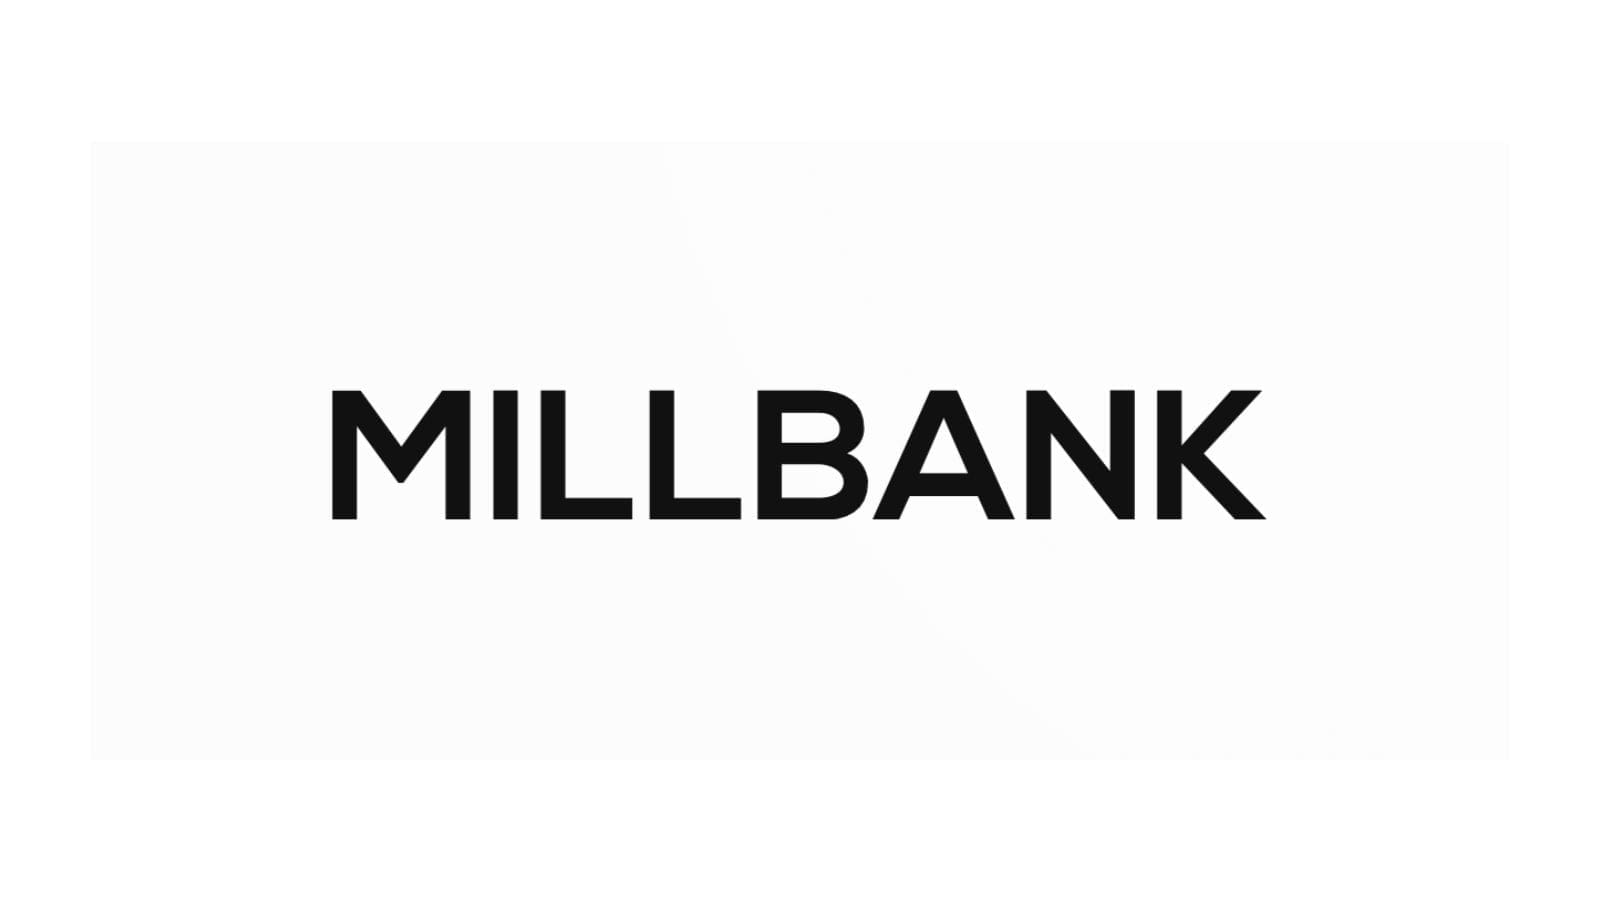 The word "MILLBANK" in black text on a white background.